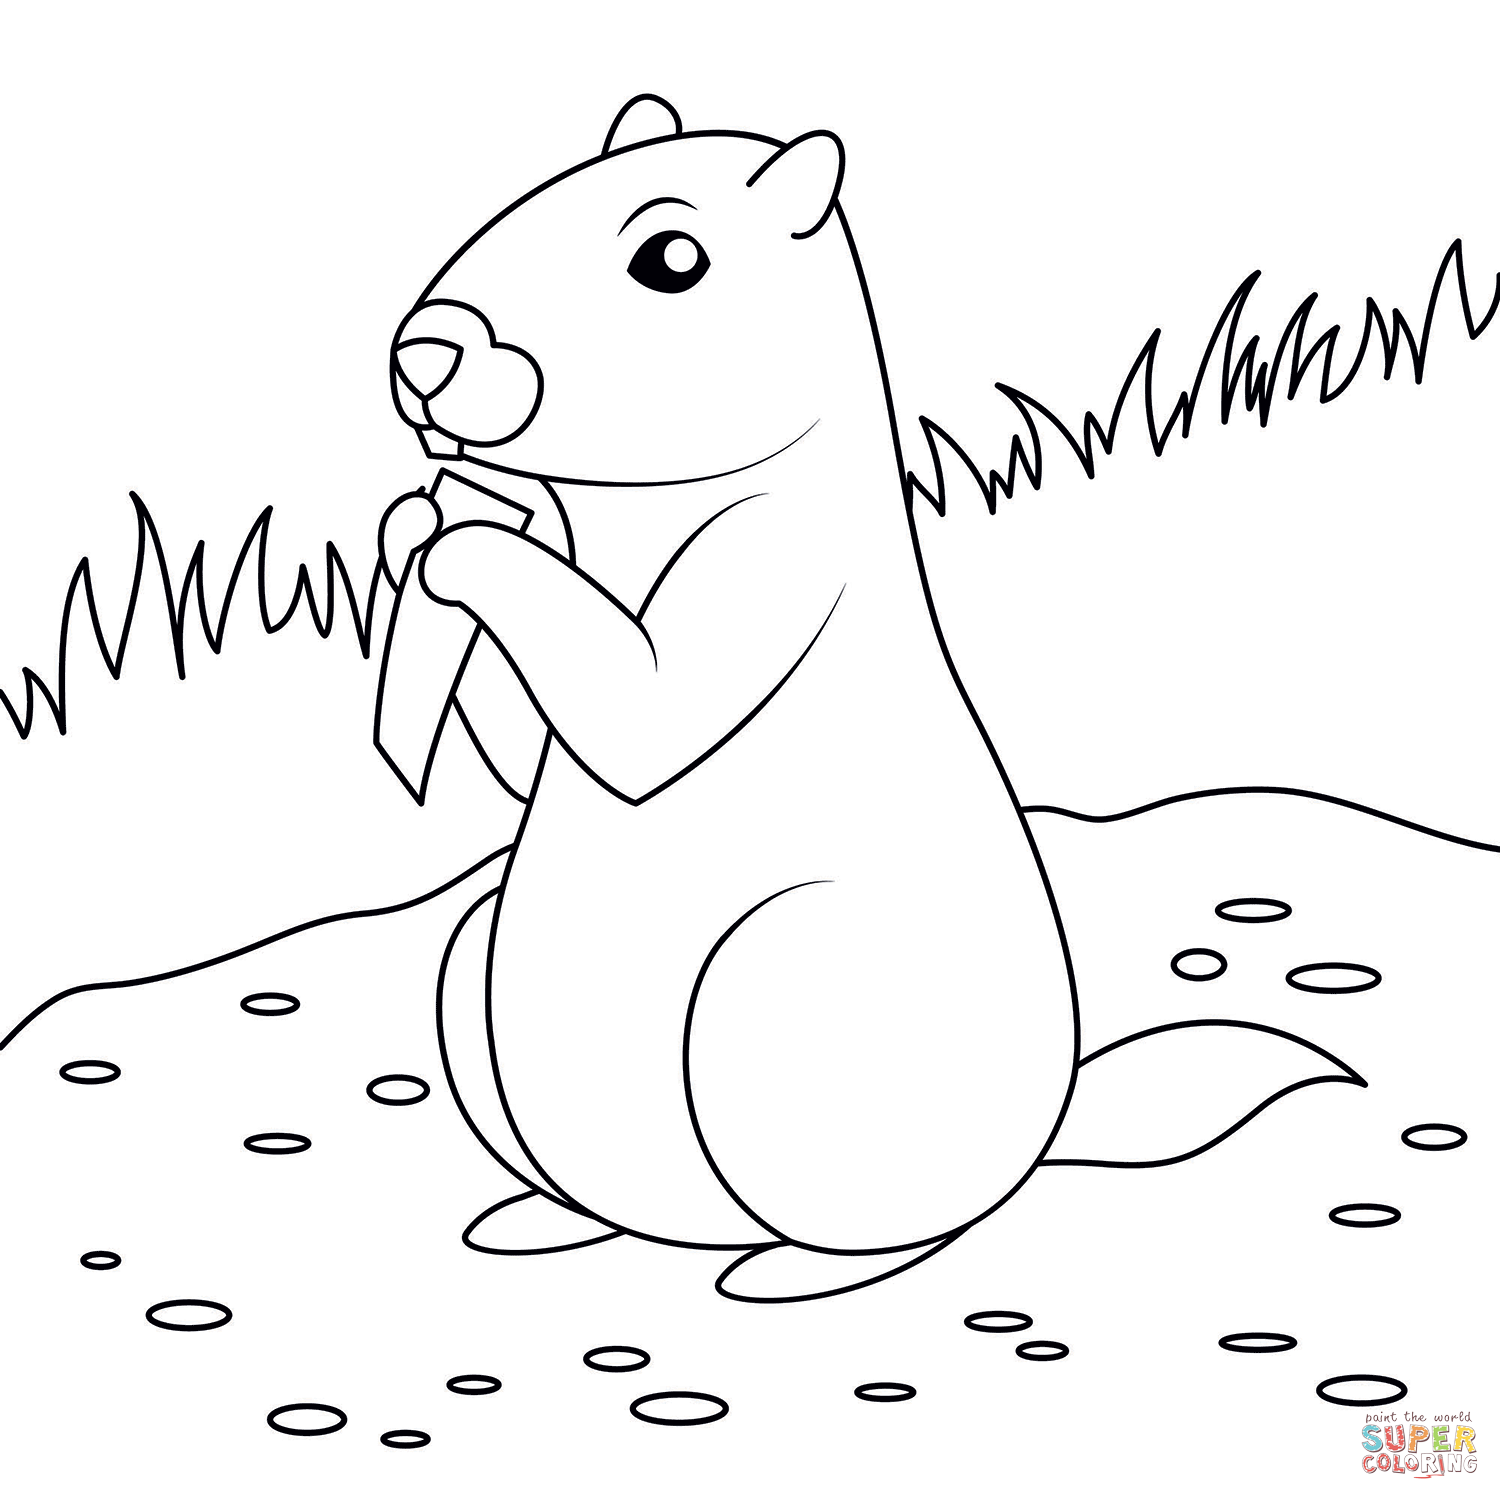 Groundhog coloring page free printable coloring pages